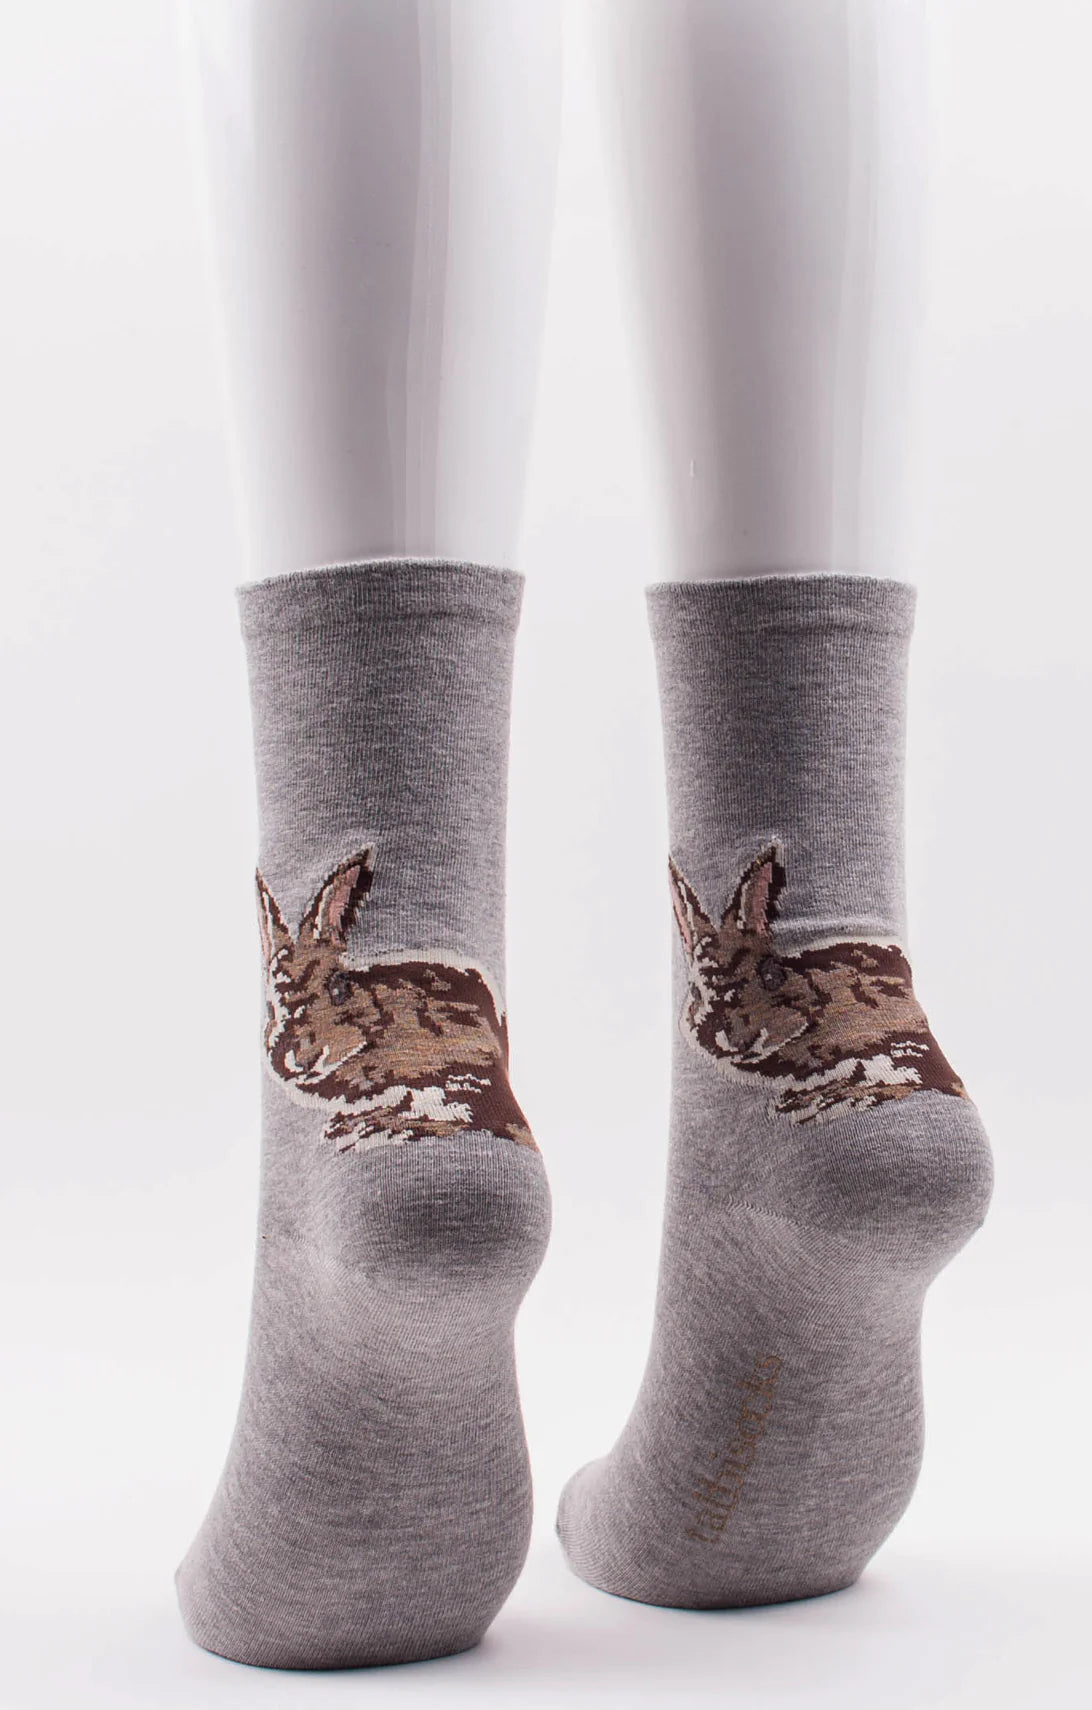 This is a photo of Tabbisocks' product name Animal Rescue Pairs "Bunny Rabbit" Socks Grey